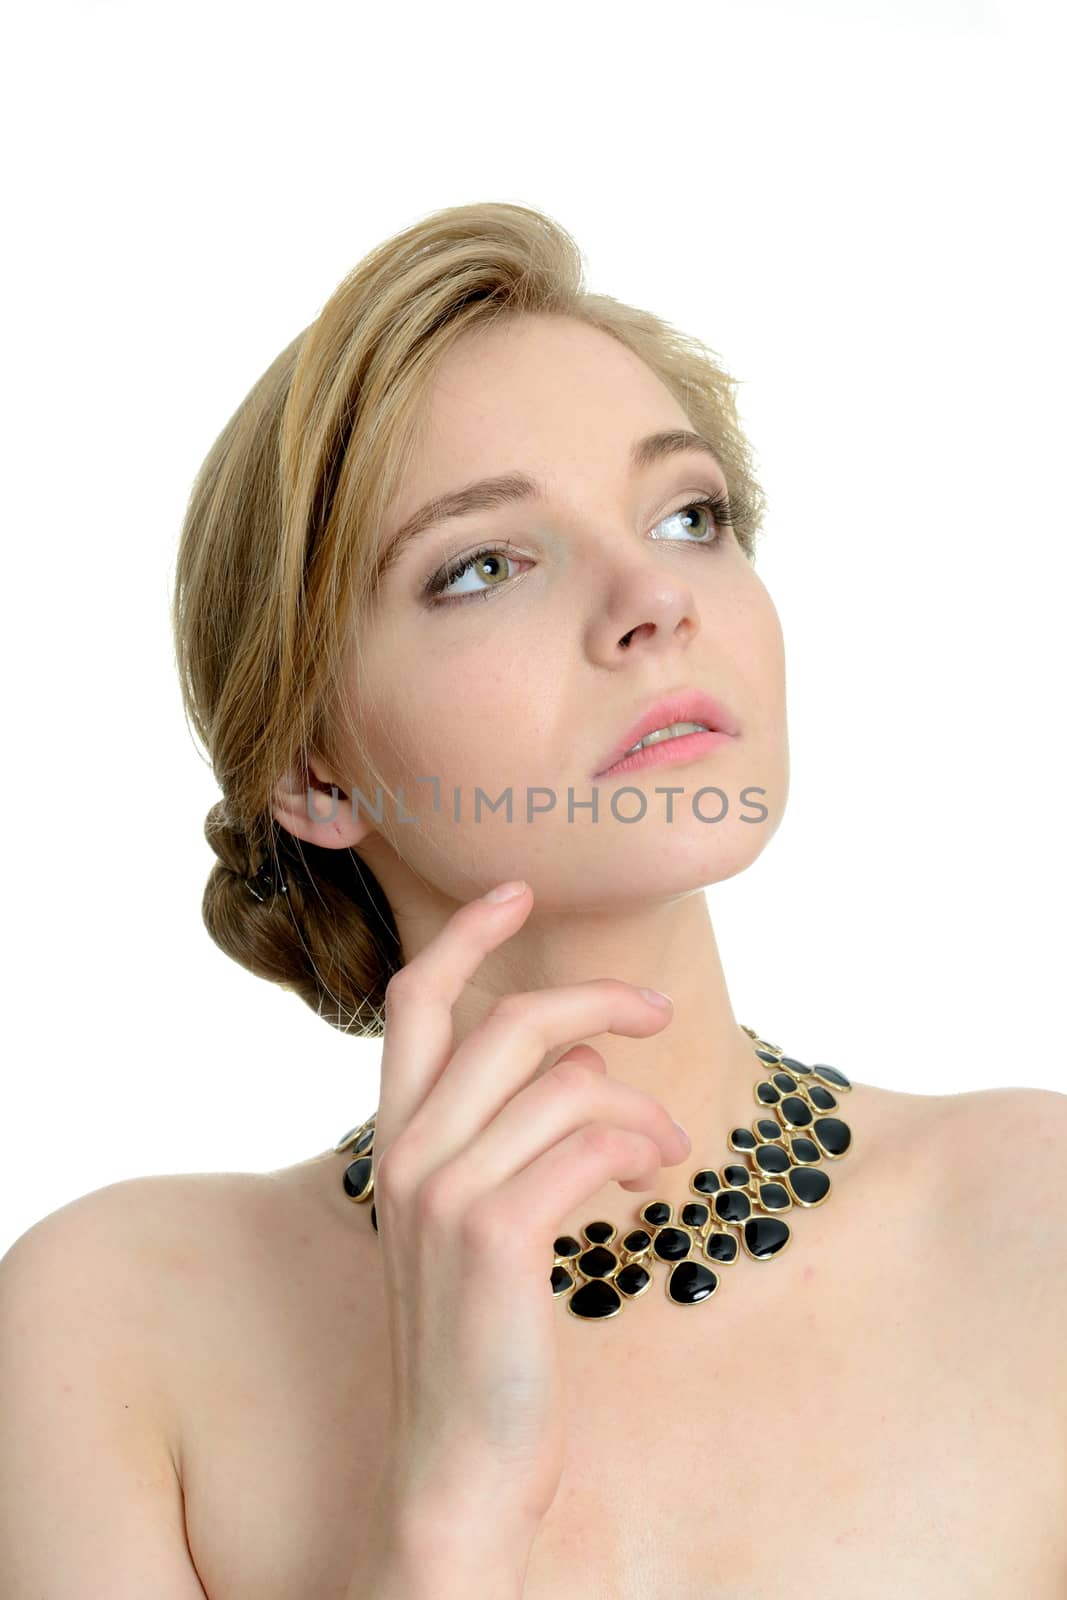 Portrait of young girl with blond hair and necklace. Female model holding hand near her chin.